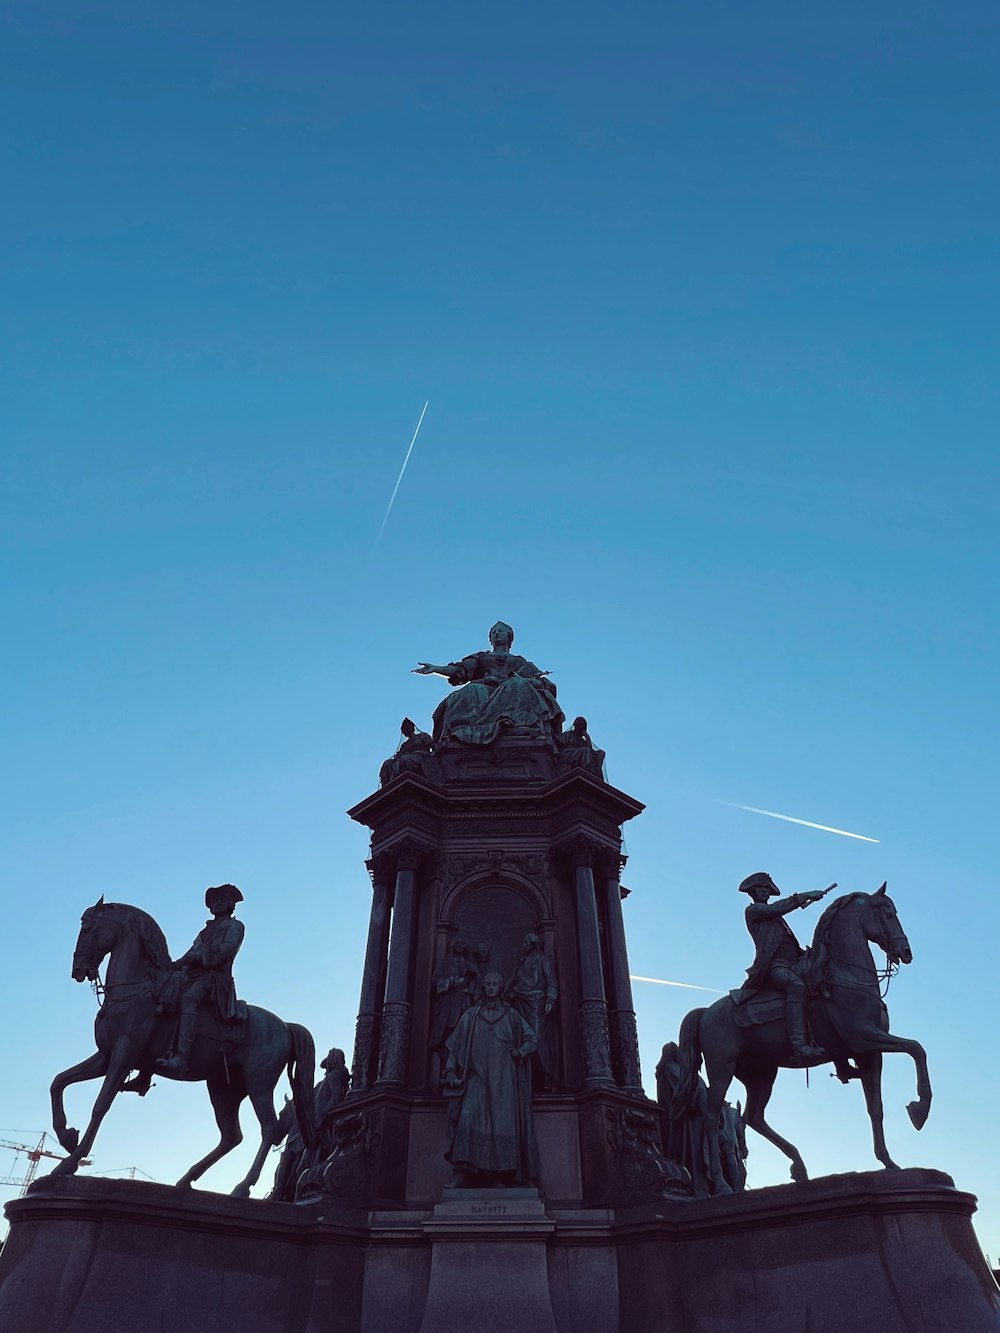 a statue of a man riding a horse next to a clock tower